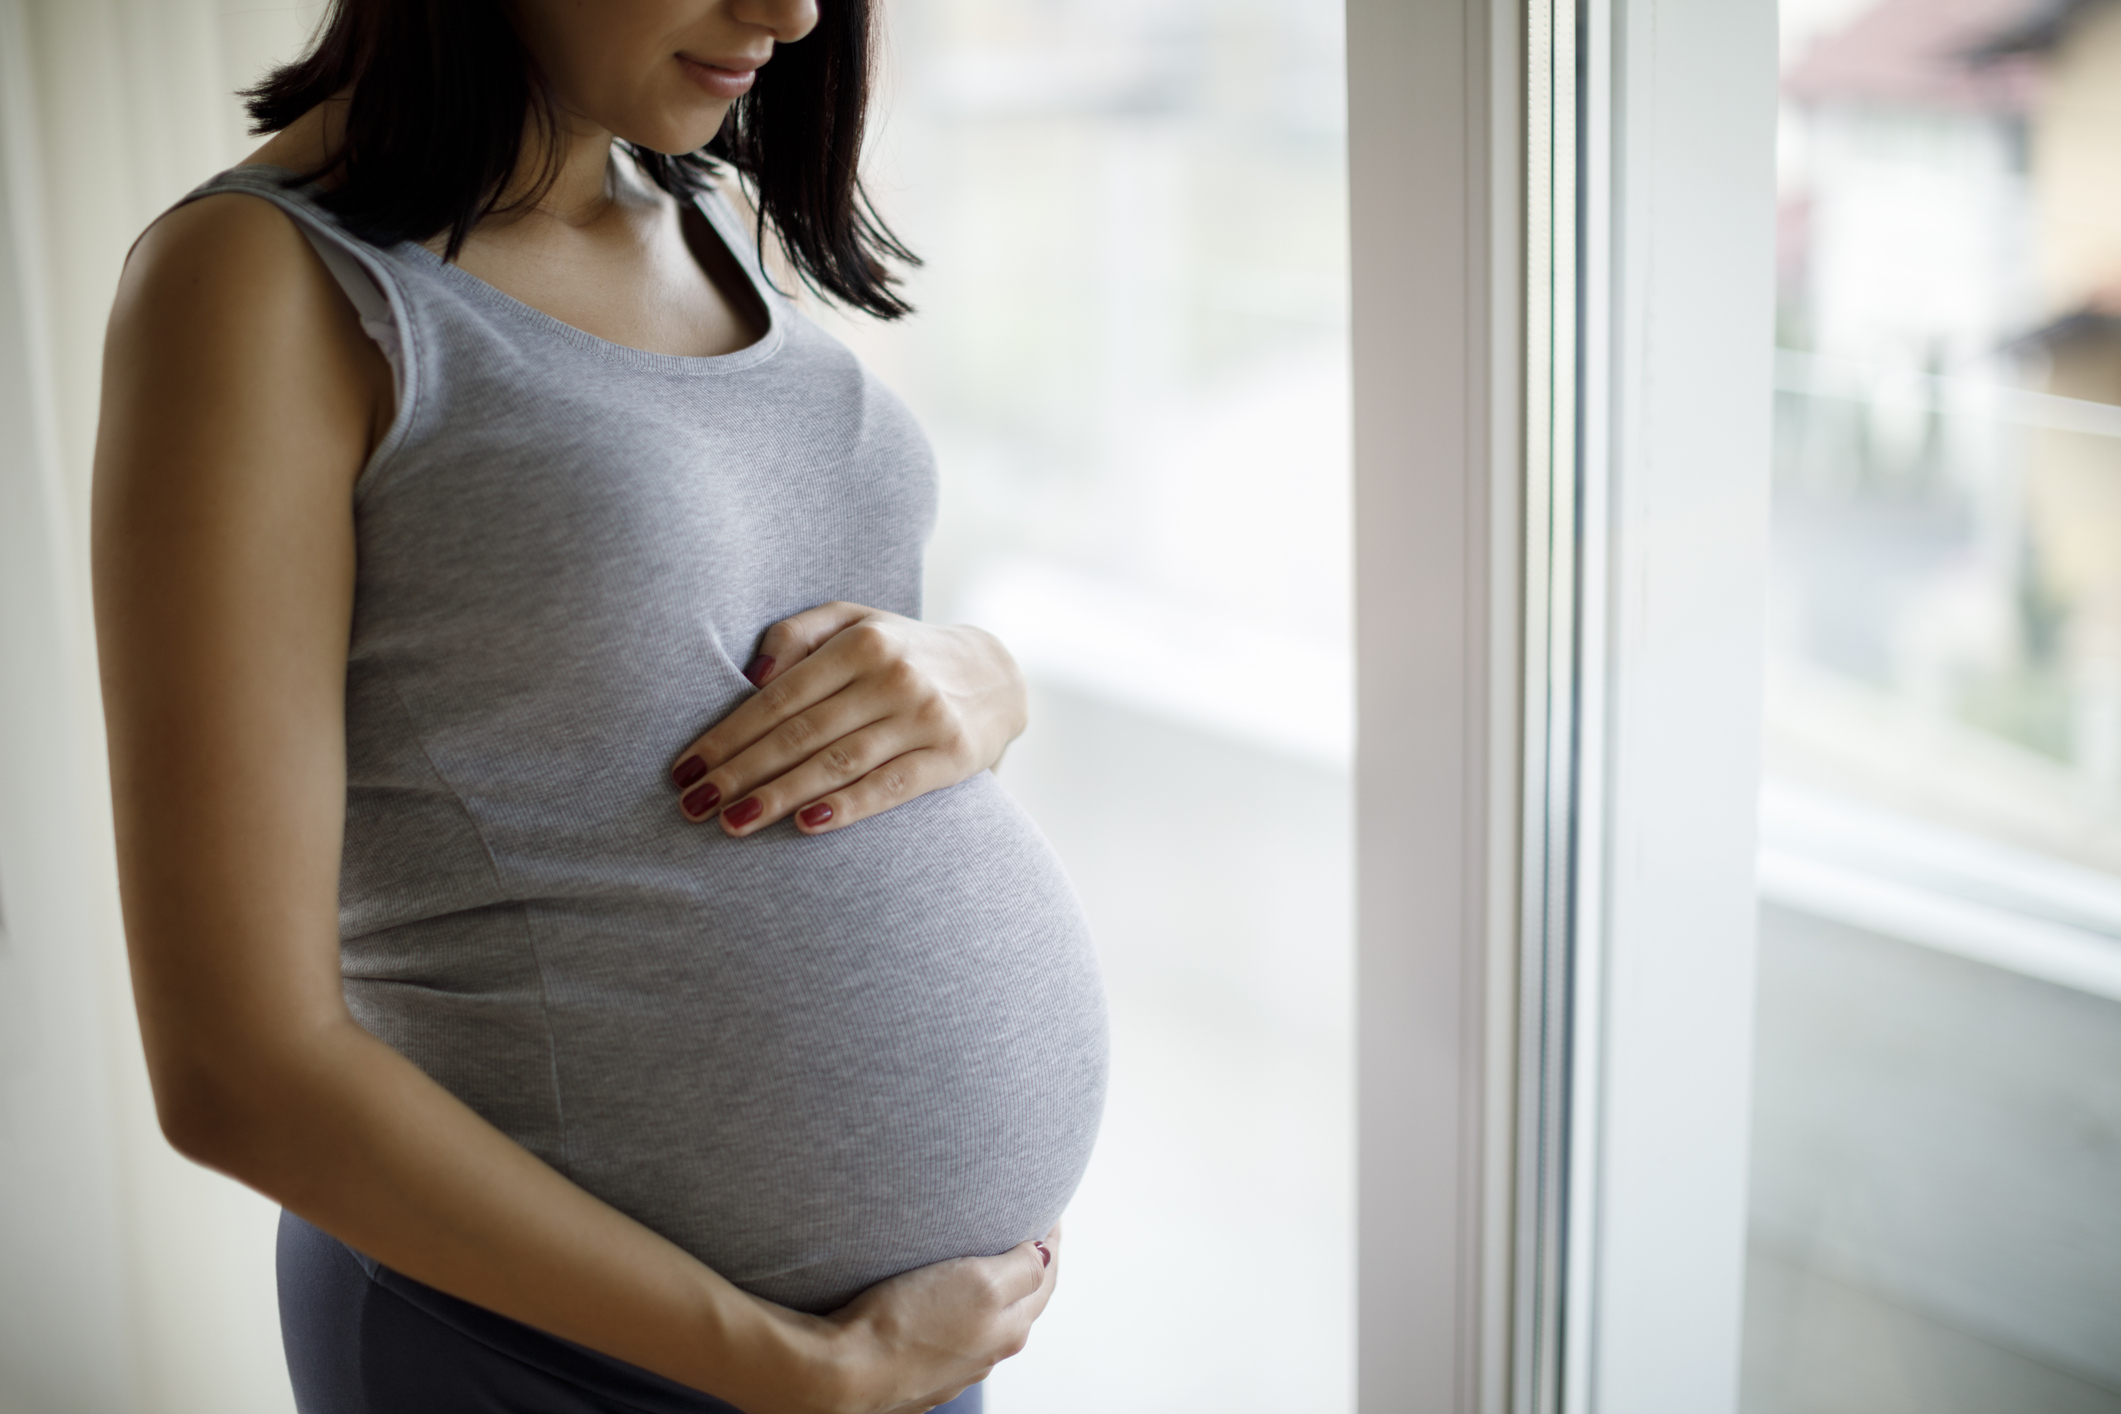 Pregnant Women In Third Trimester Unlikely To Pass Sars Cov 2 Infection To Newborns National